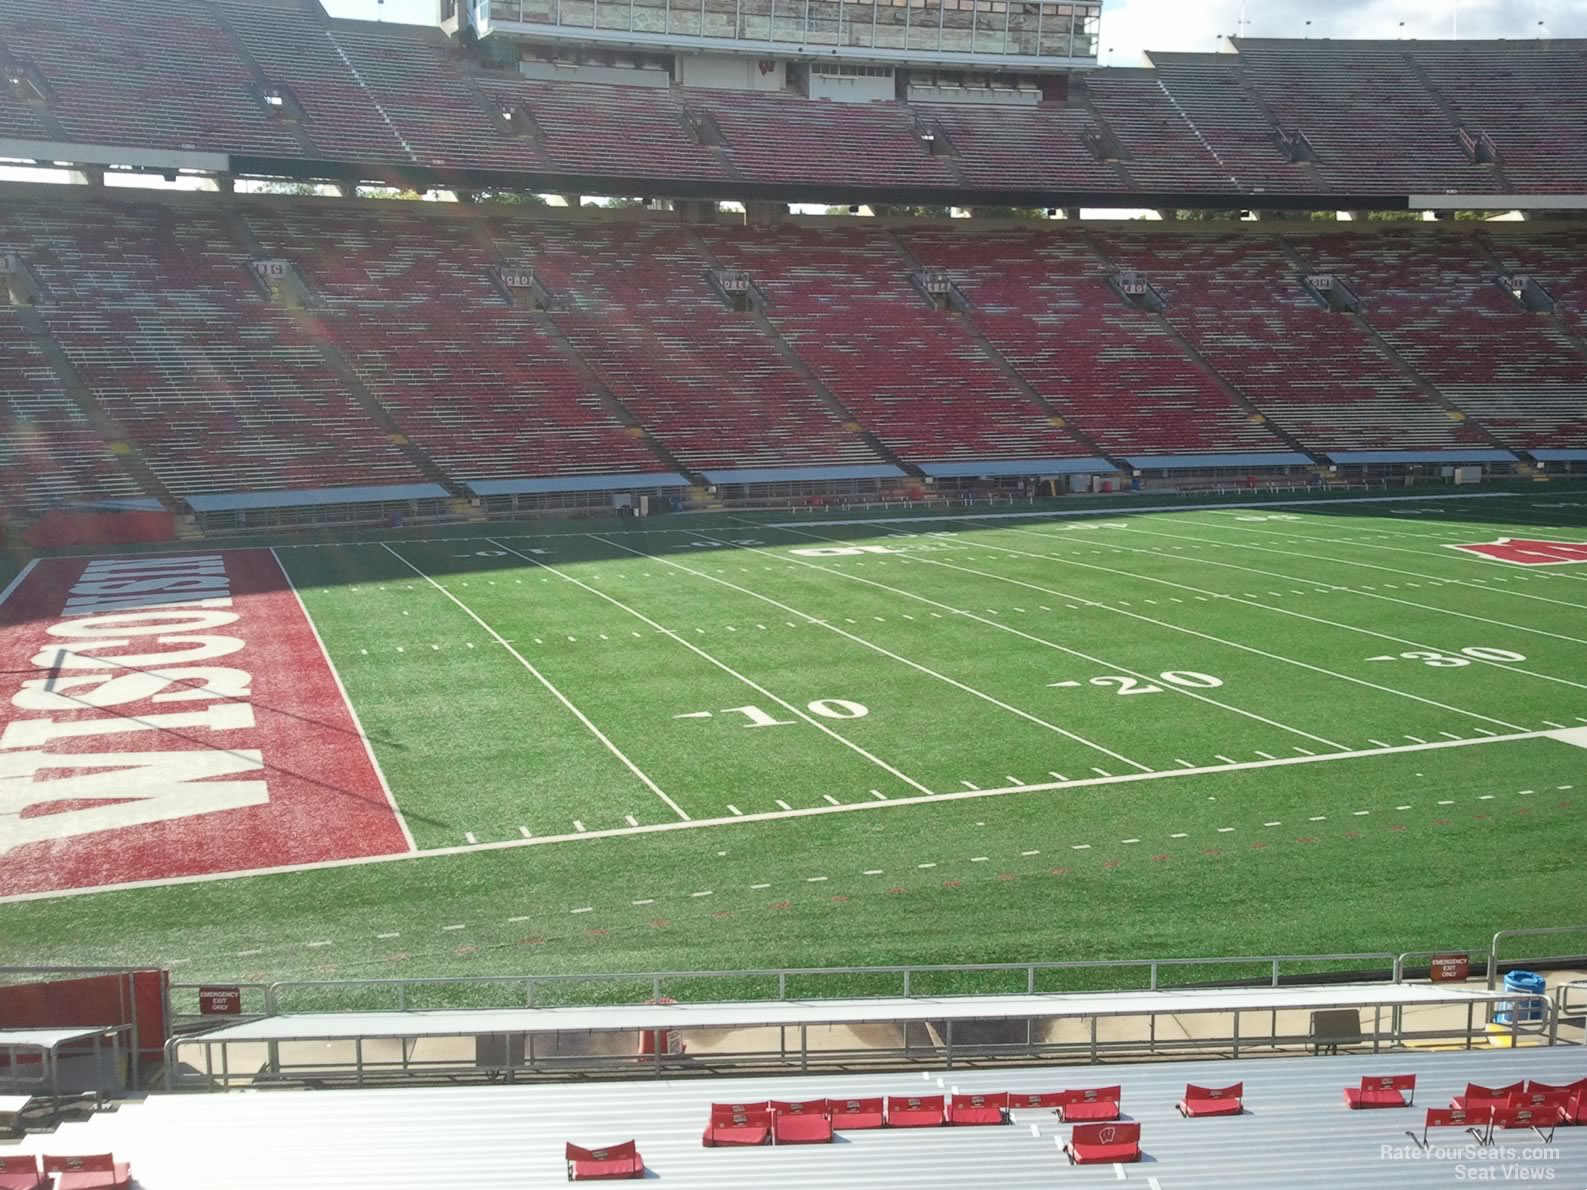 section w, row 30 seat view  - camp randall stadium